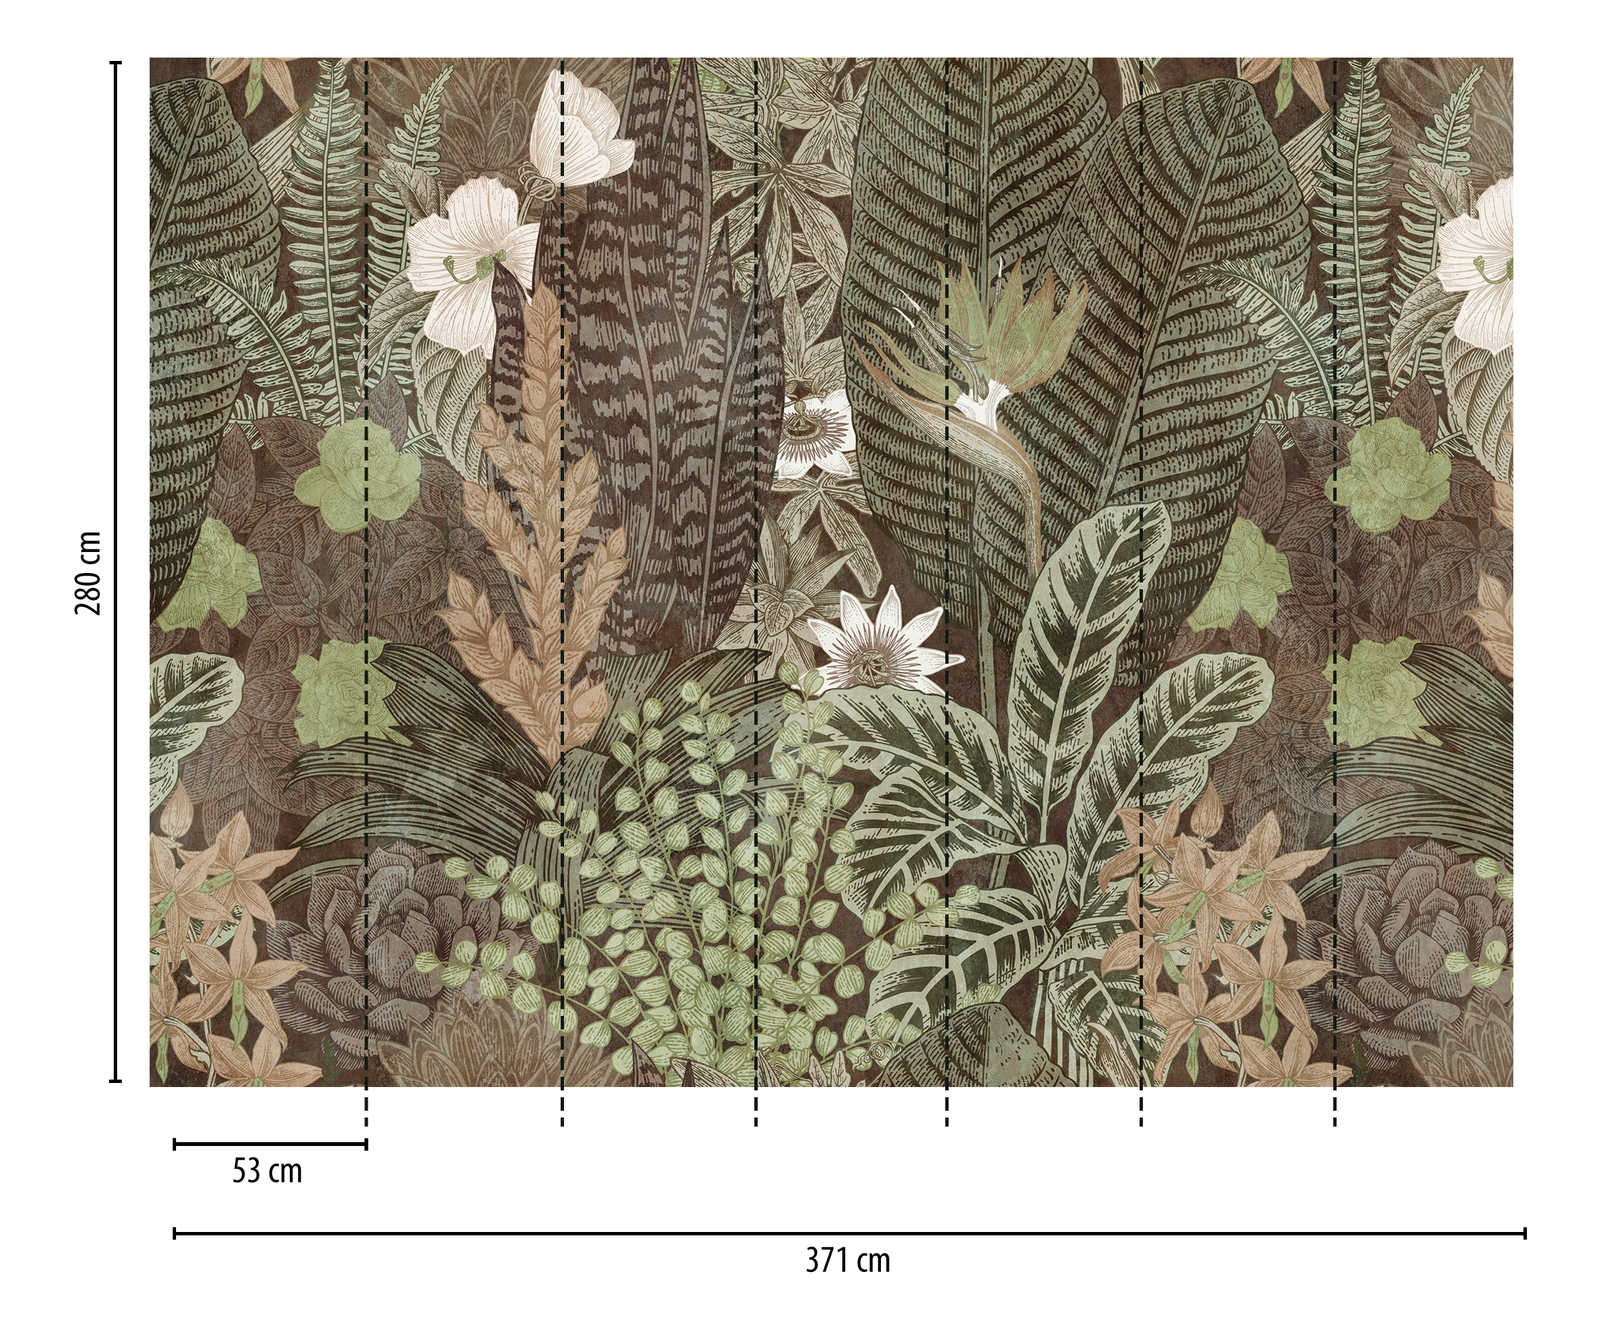             Wallpaper novelty - motif wallpaper nature design in drawing style, brown & green
        